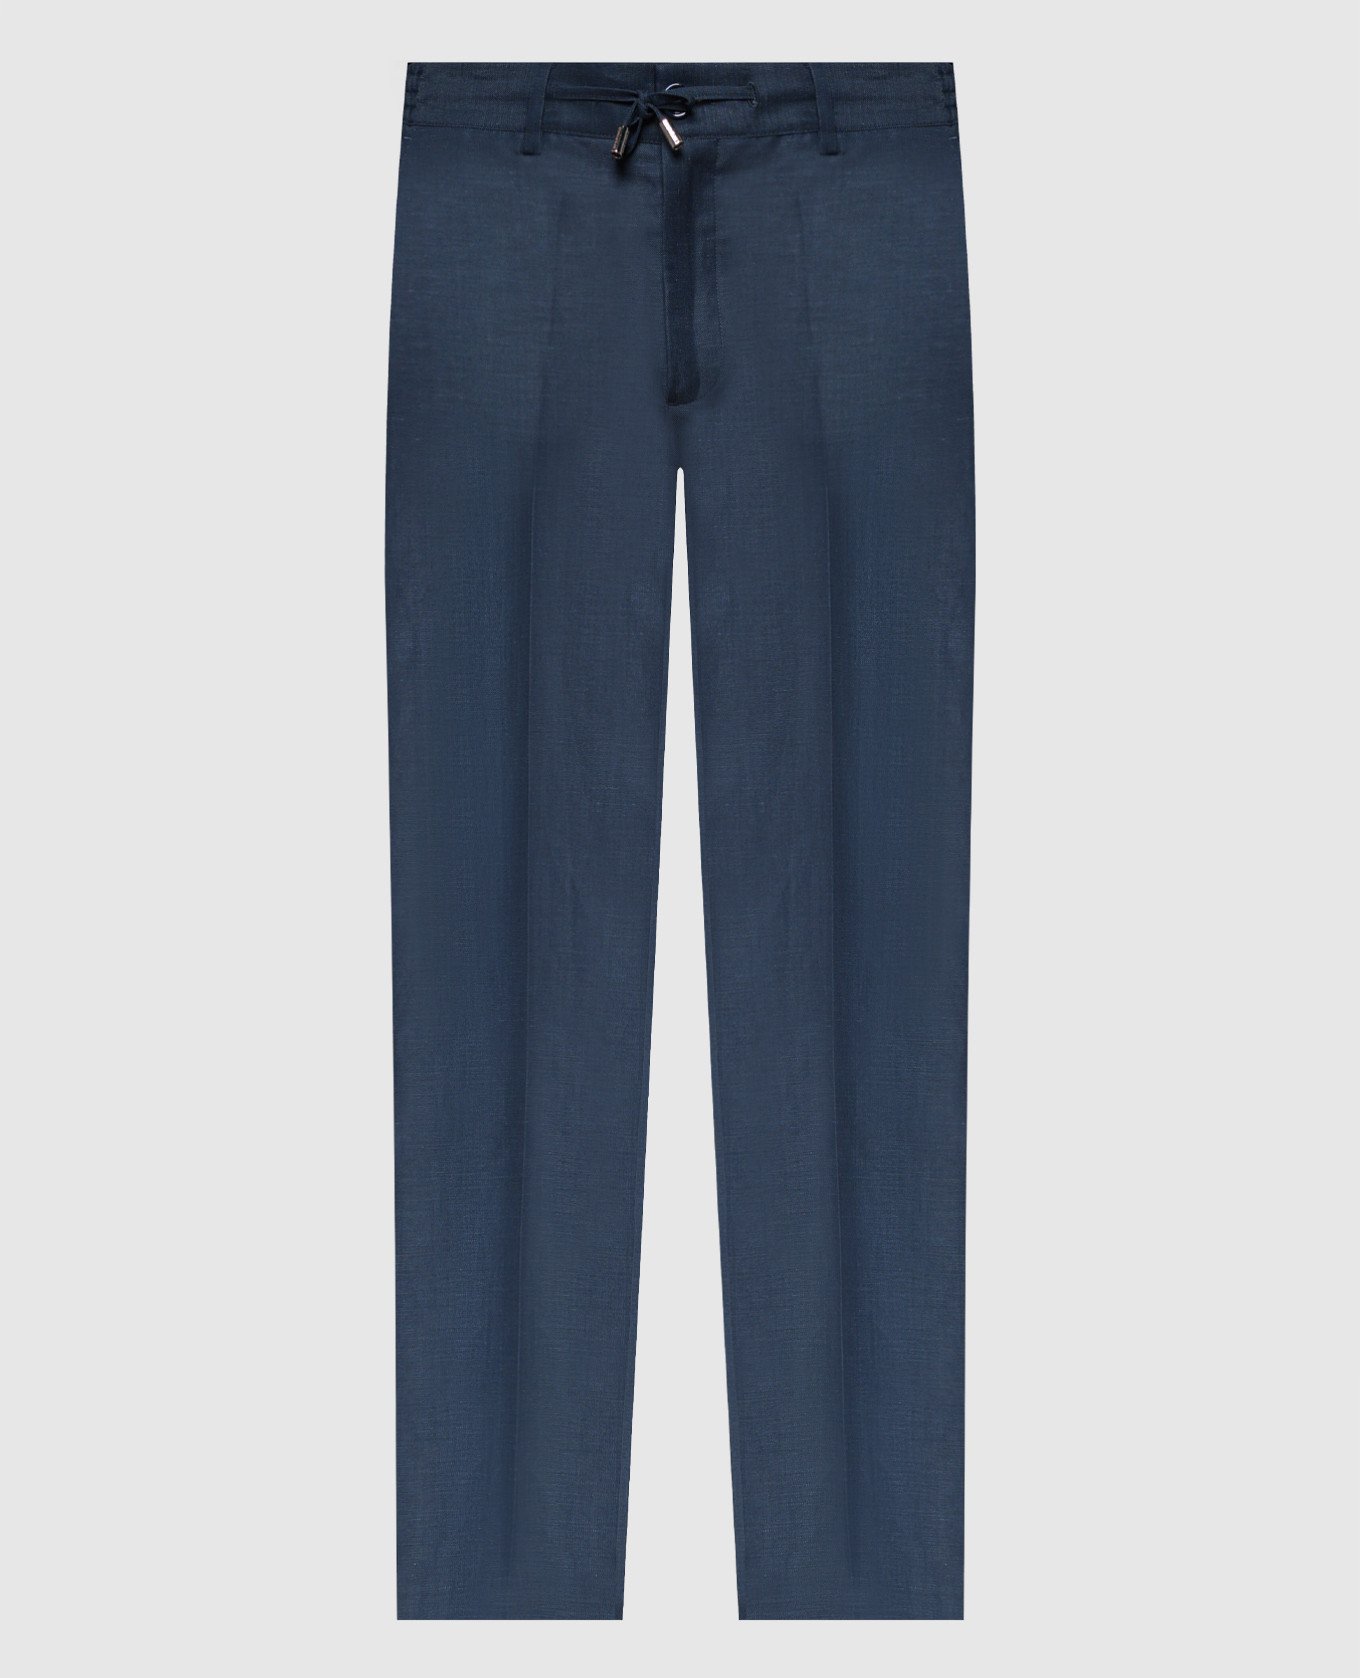 Blue trousers in wool and linen with a metallic logo